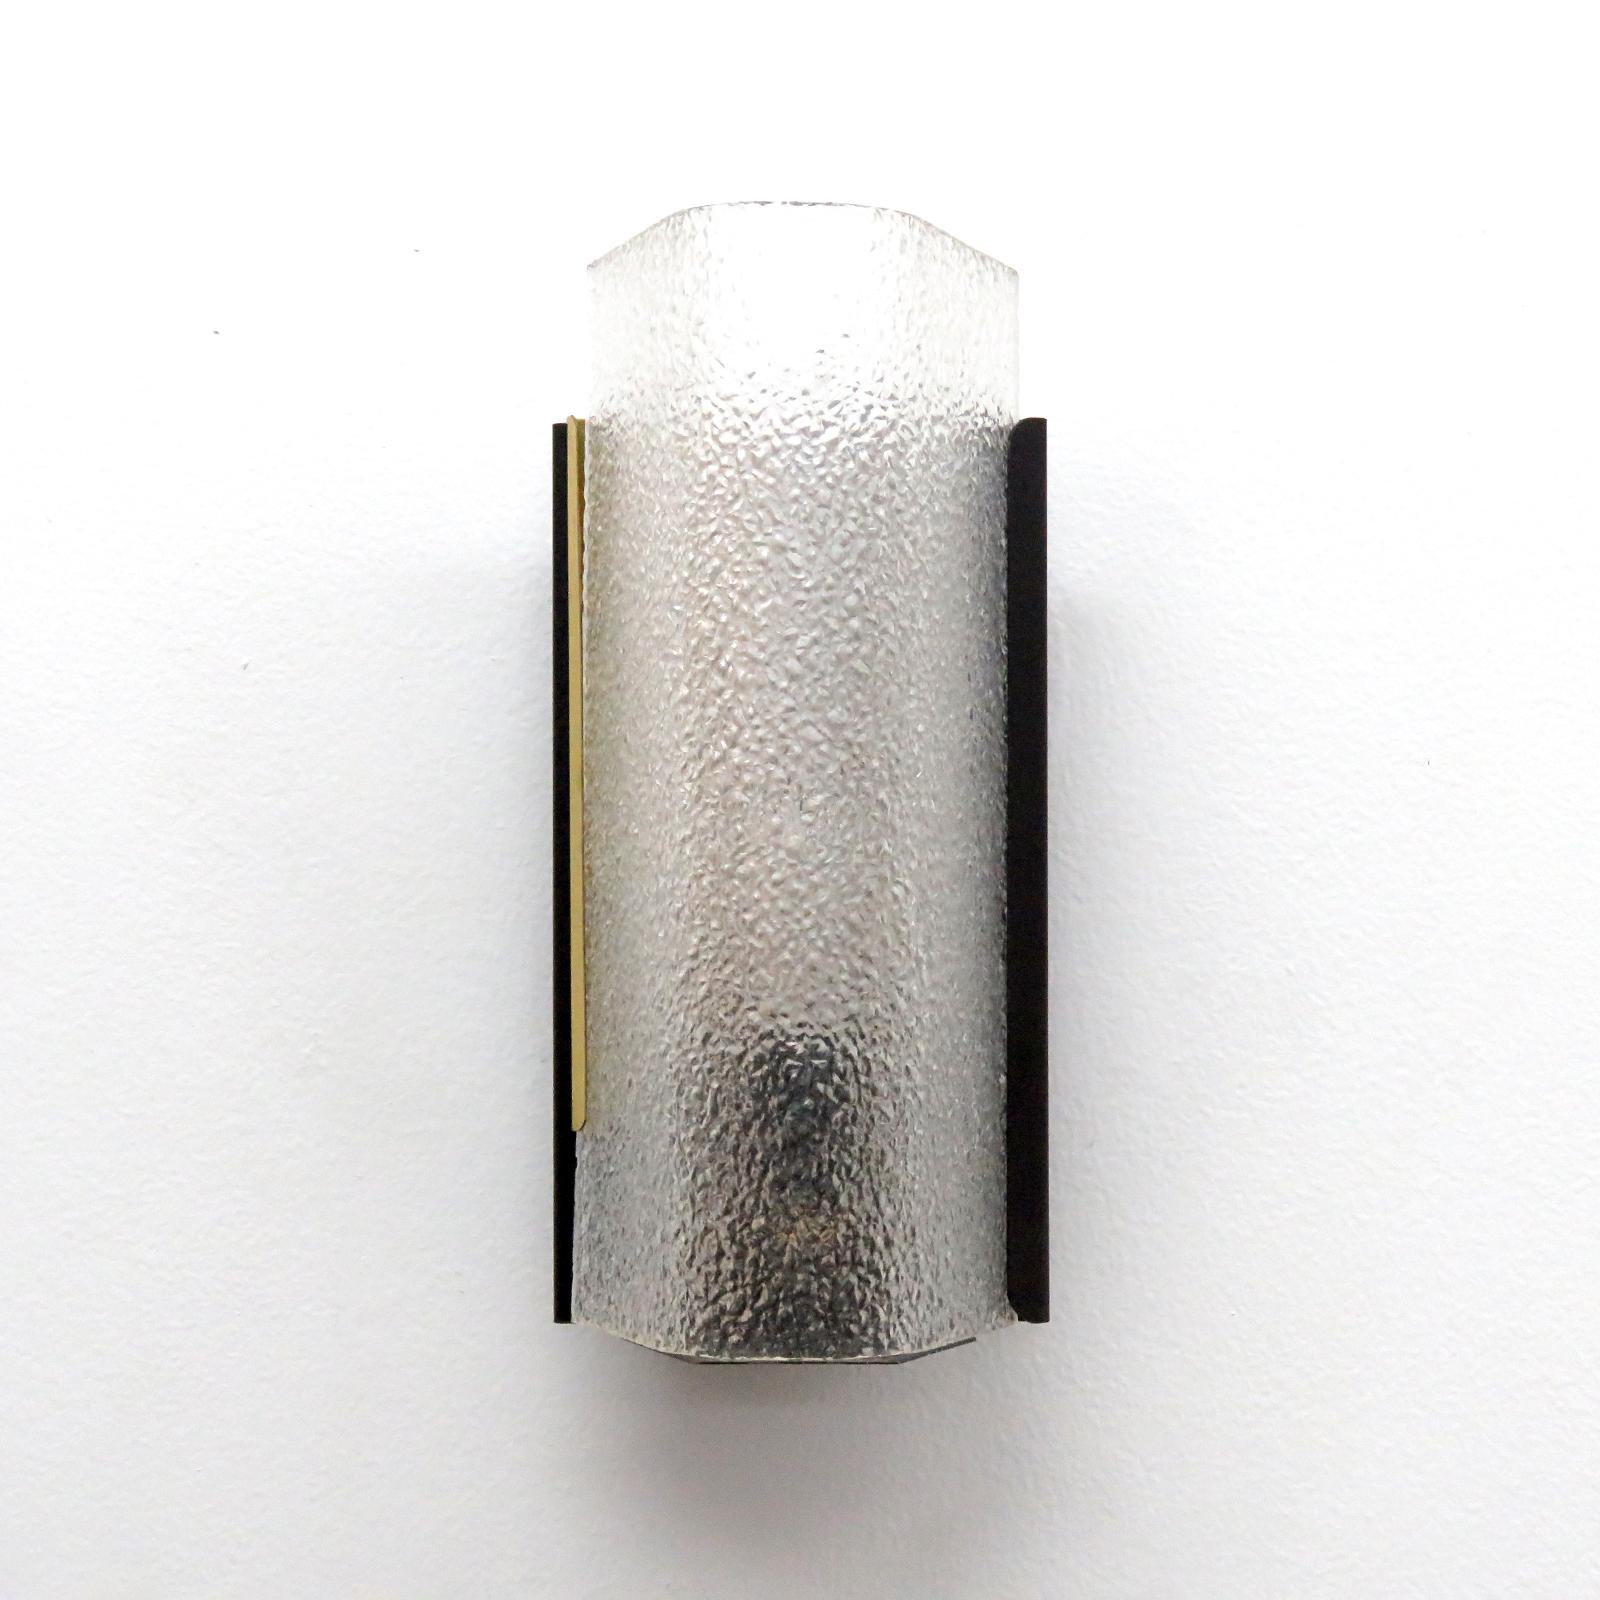 Elegant French wall sconce by Arlus, in brass, enameled metal and textured Lucite, one E12 socket, max. wattage 60w, bulb provided as a onetime courtesy. Only a single available.